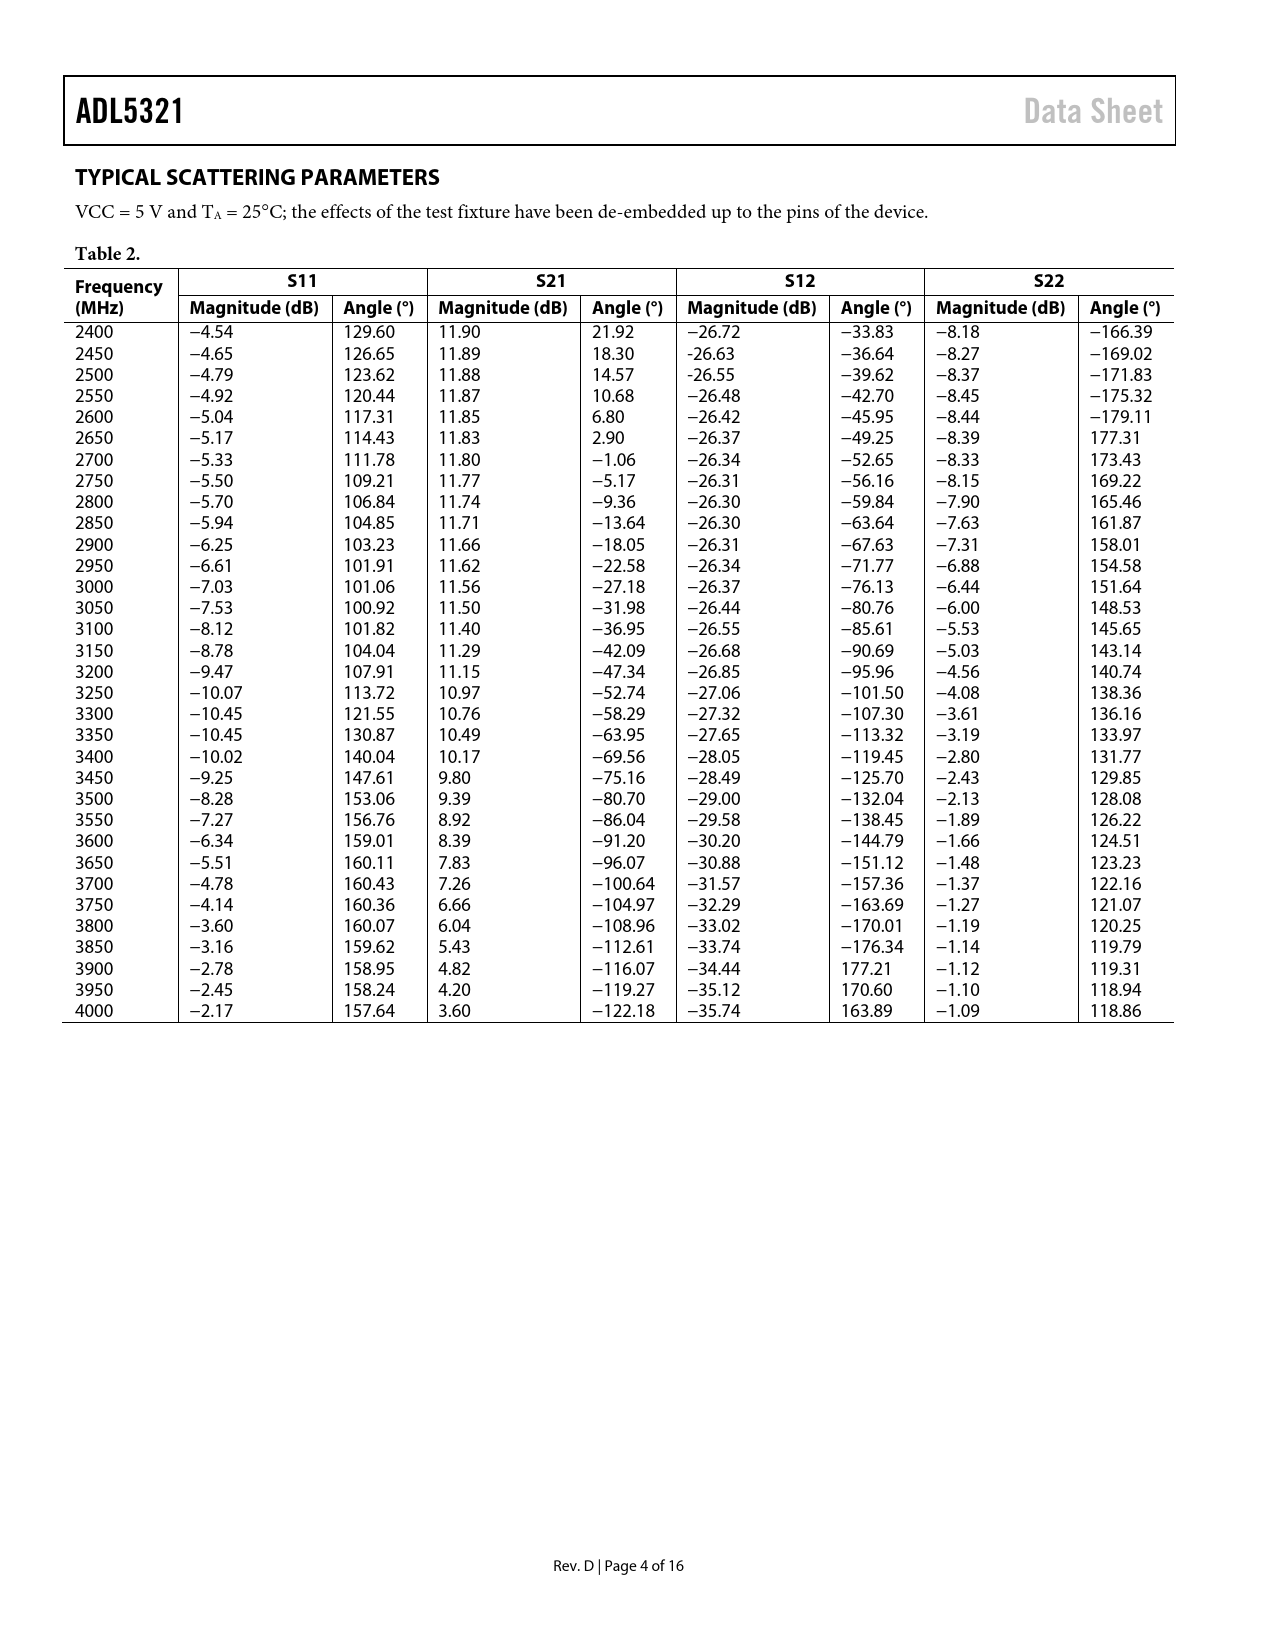 ADL5321 Data Sheet TYPICAL SCATTERING PARAMETERS Table 2 Frequency S11 S21 S12 S22 (MHz)